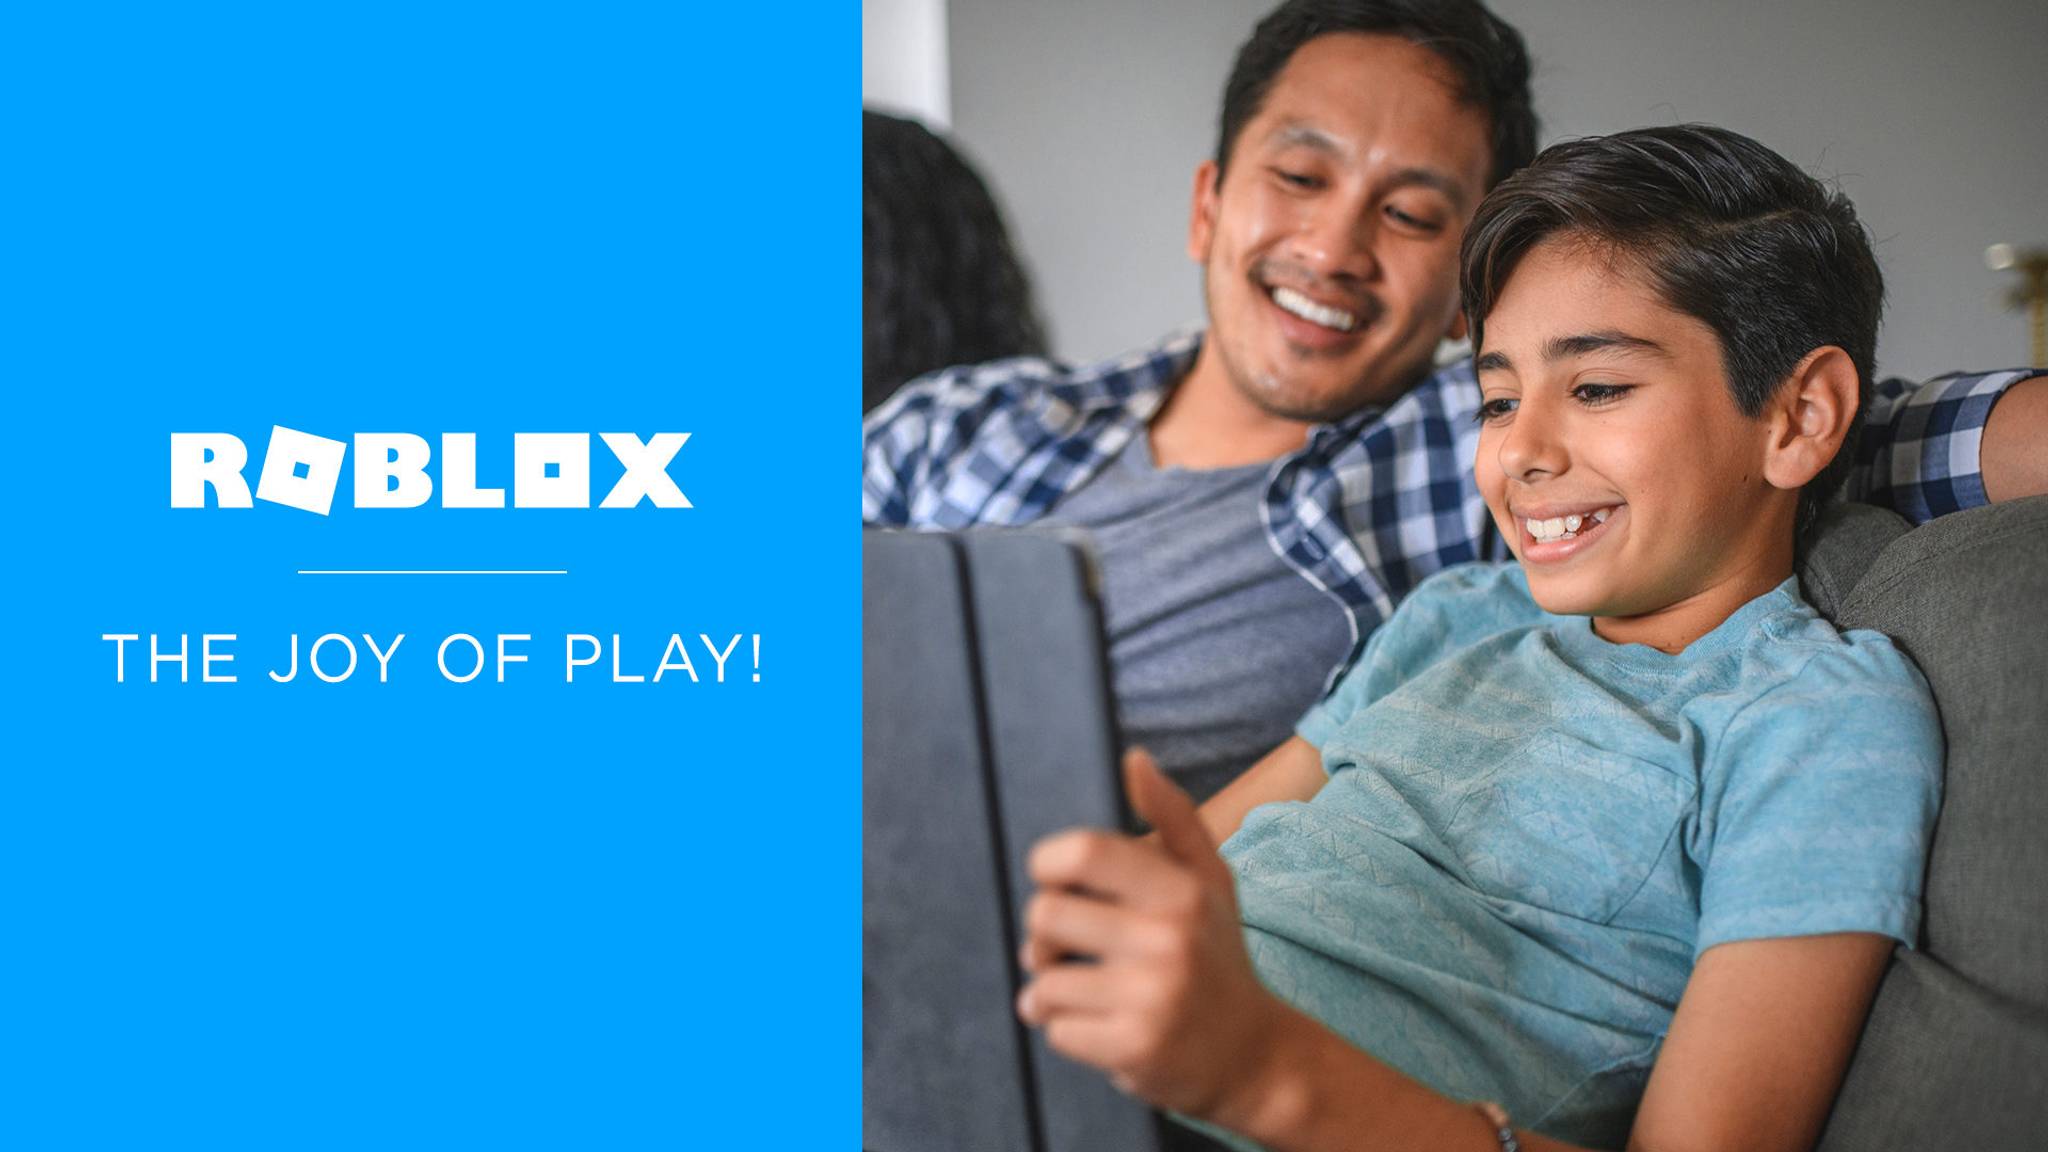 Roblox: unstructured play to connect with the world